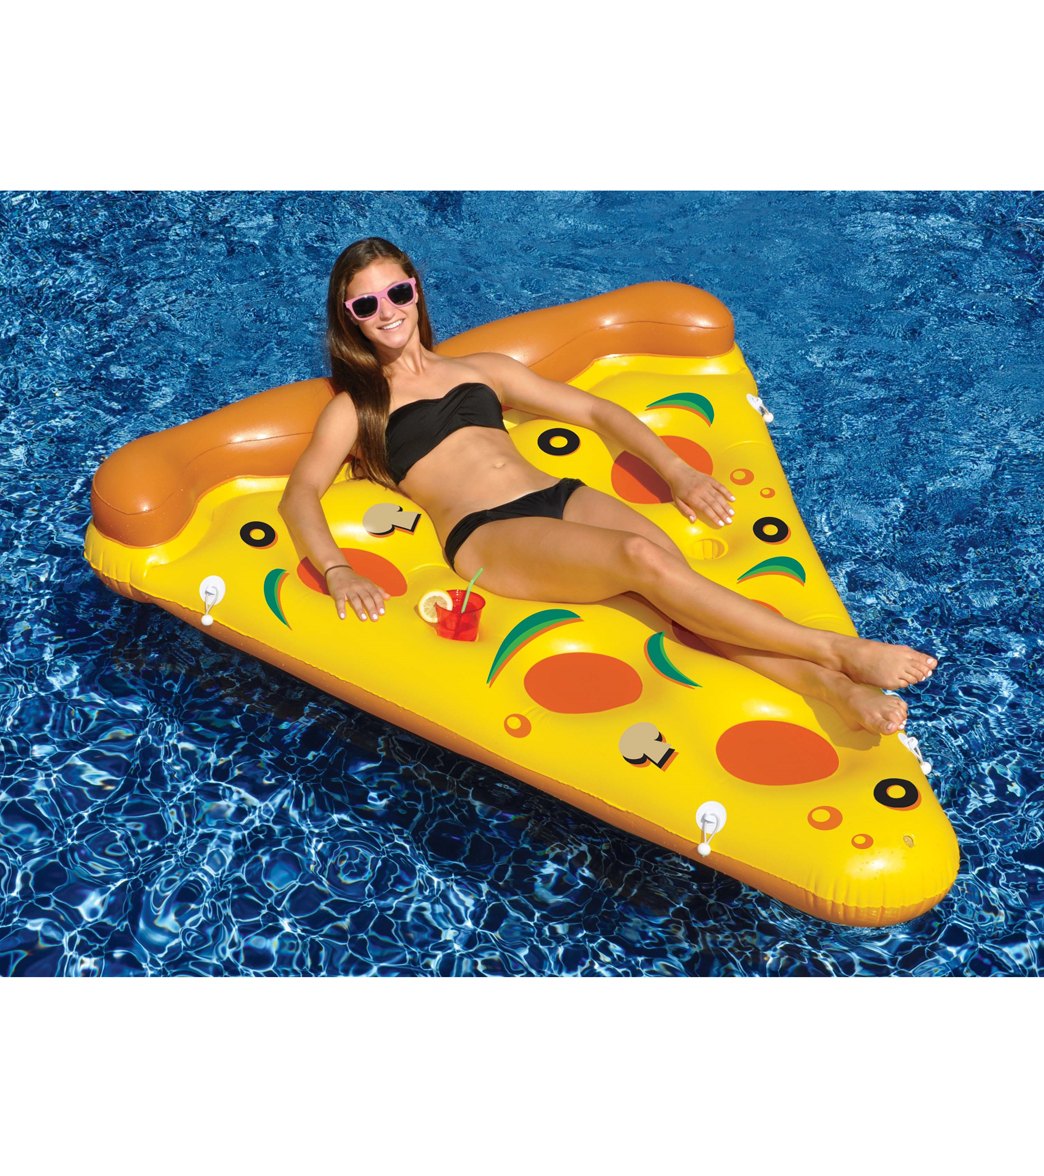 Swimline Inflatable Pool Pizza Slice Ride-On Pool Float at SwimOutlet.com